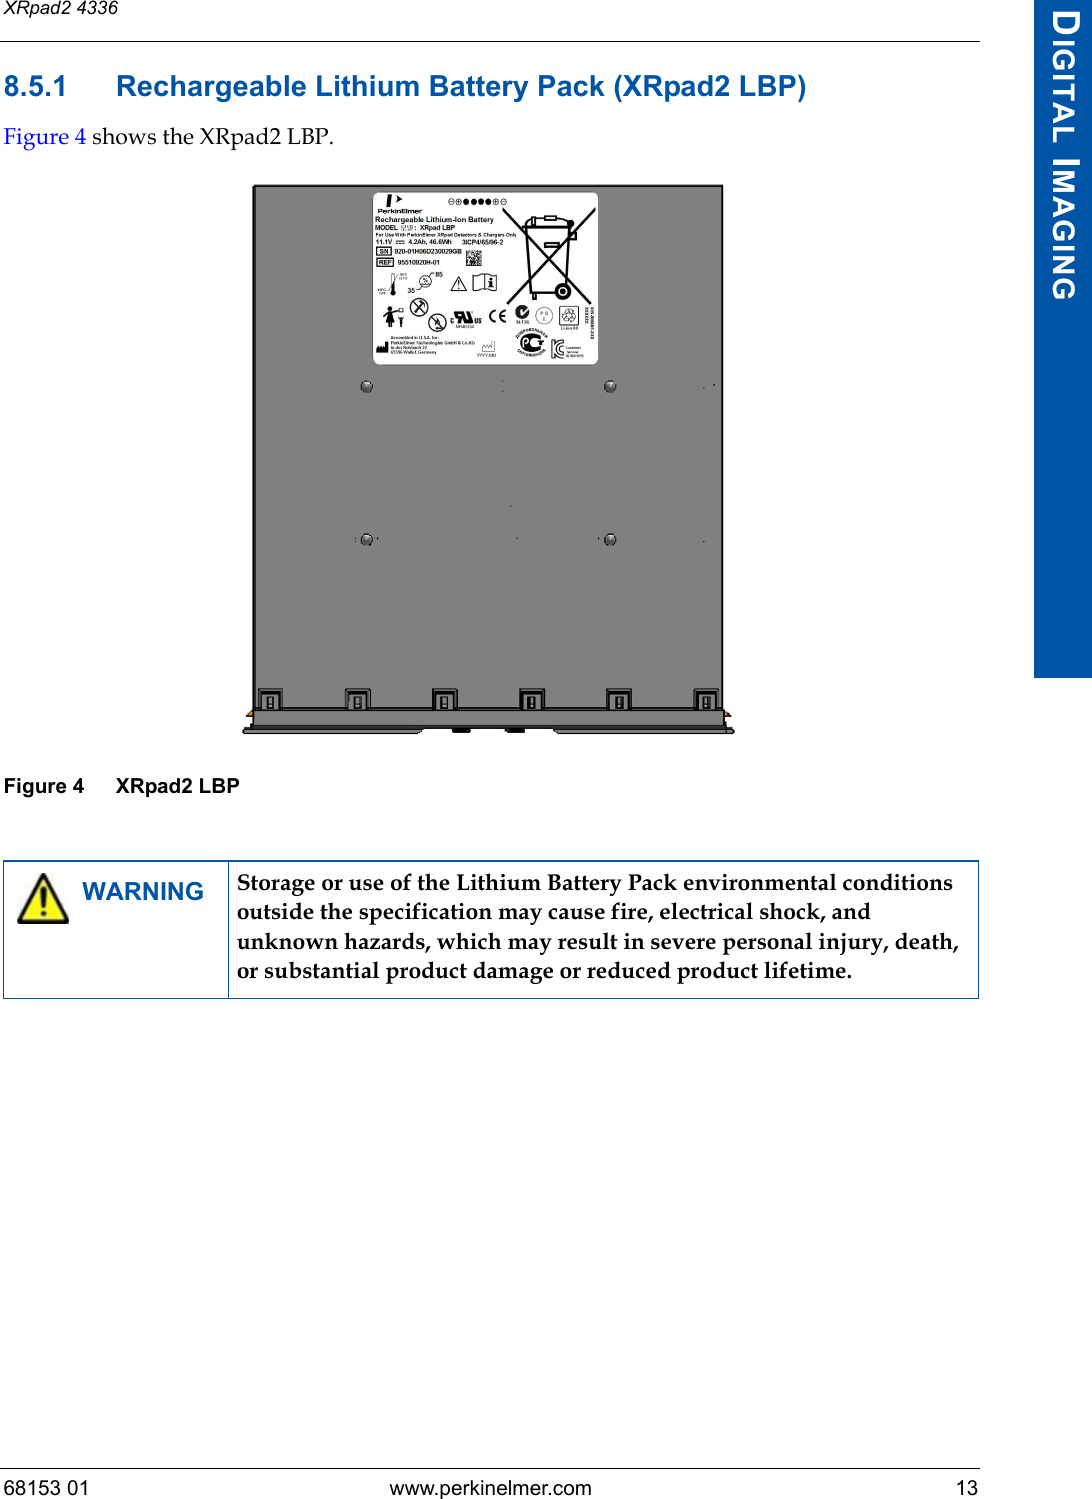 68153 01 www.perkinelmer.com 13XRpad2 4336DIGITAL IMAGING8.5.1 Rechargeable Lithium Battery Pack (XRpad2 LBP)Figure 4 shows the XRpad2 LBP.Figure 4 XRpad2 LBPWARNING Storage or use of the Lithium Battery Pack environmental conditions outside the specification may cause fire, electrical shock, and unknown hazards, which may result in severe personal injury, death, or substantial product damage or reduced product lifetime.